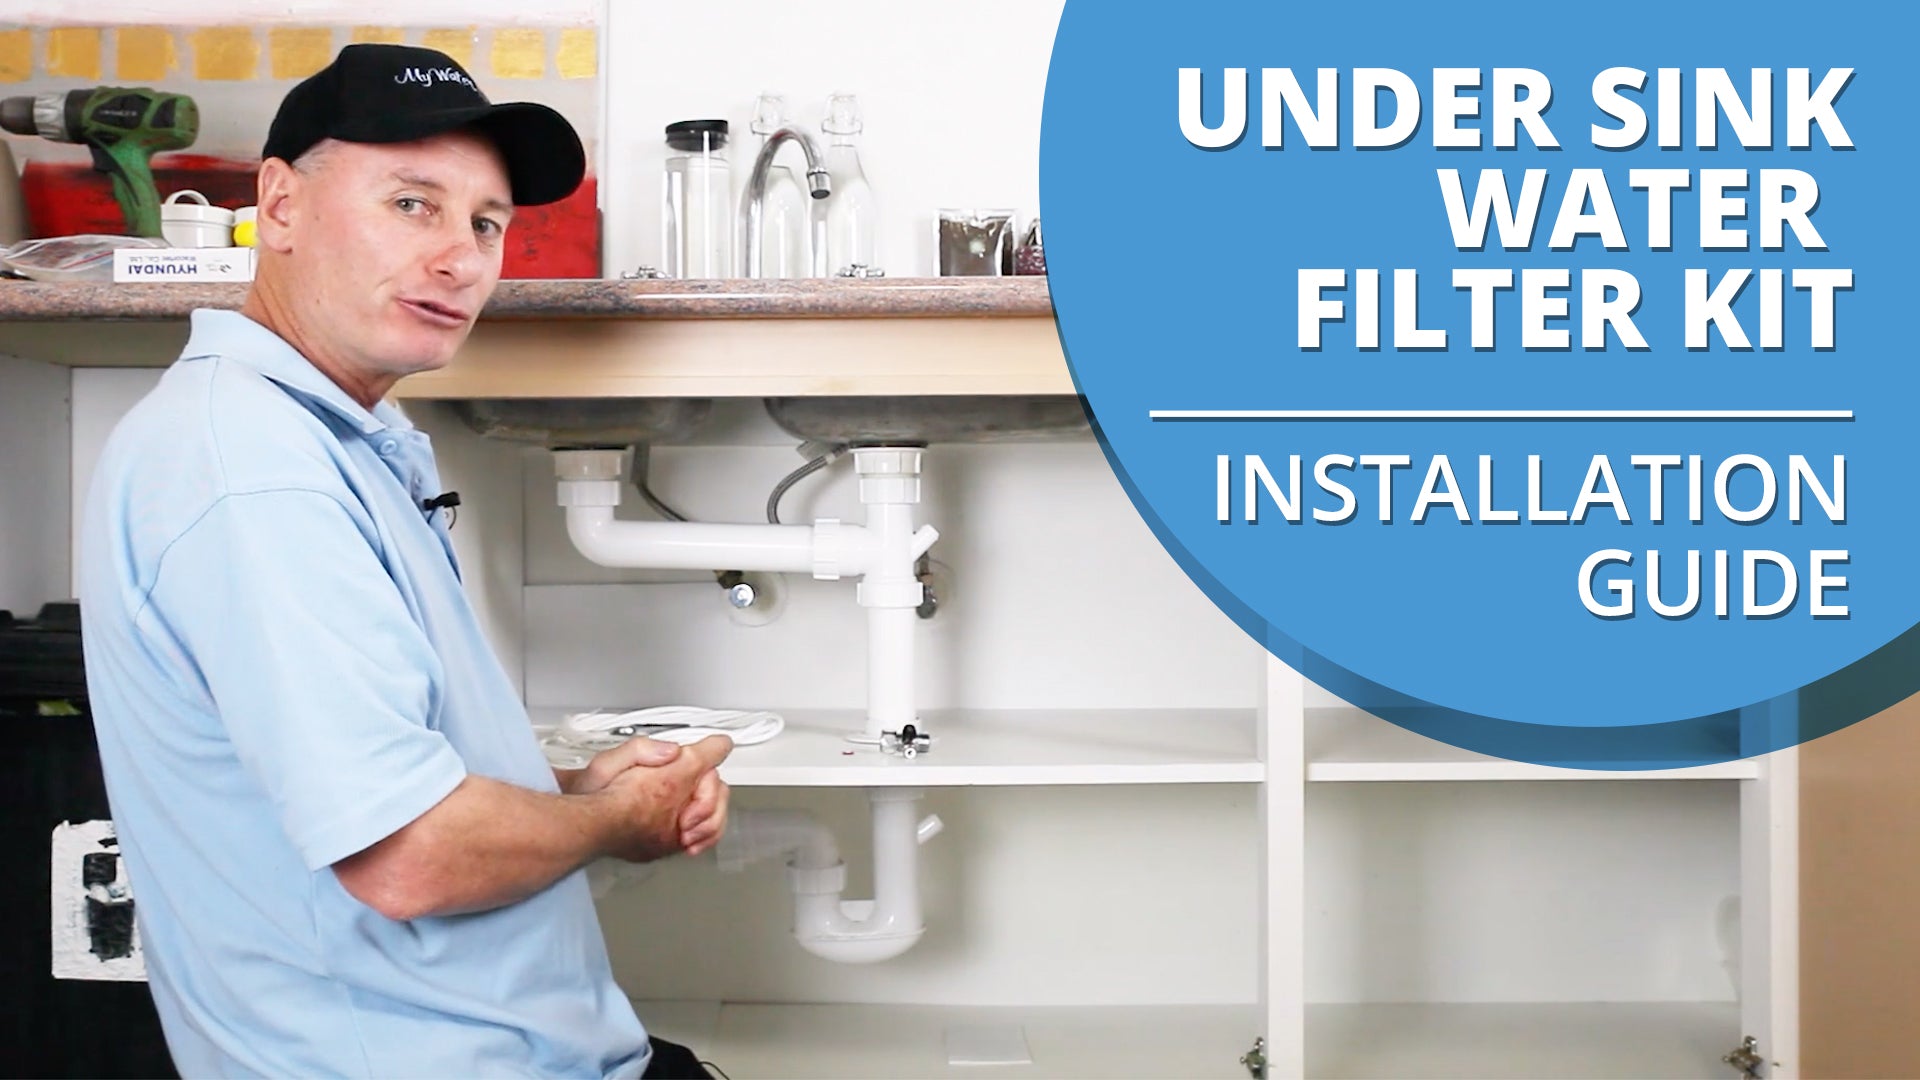 [VIDEO] How to Install an Under Sink Water Filter Kit